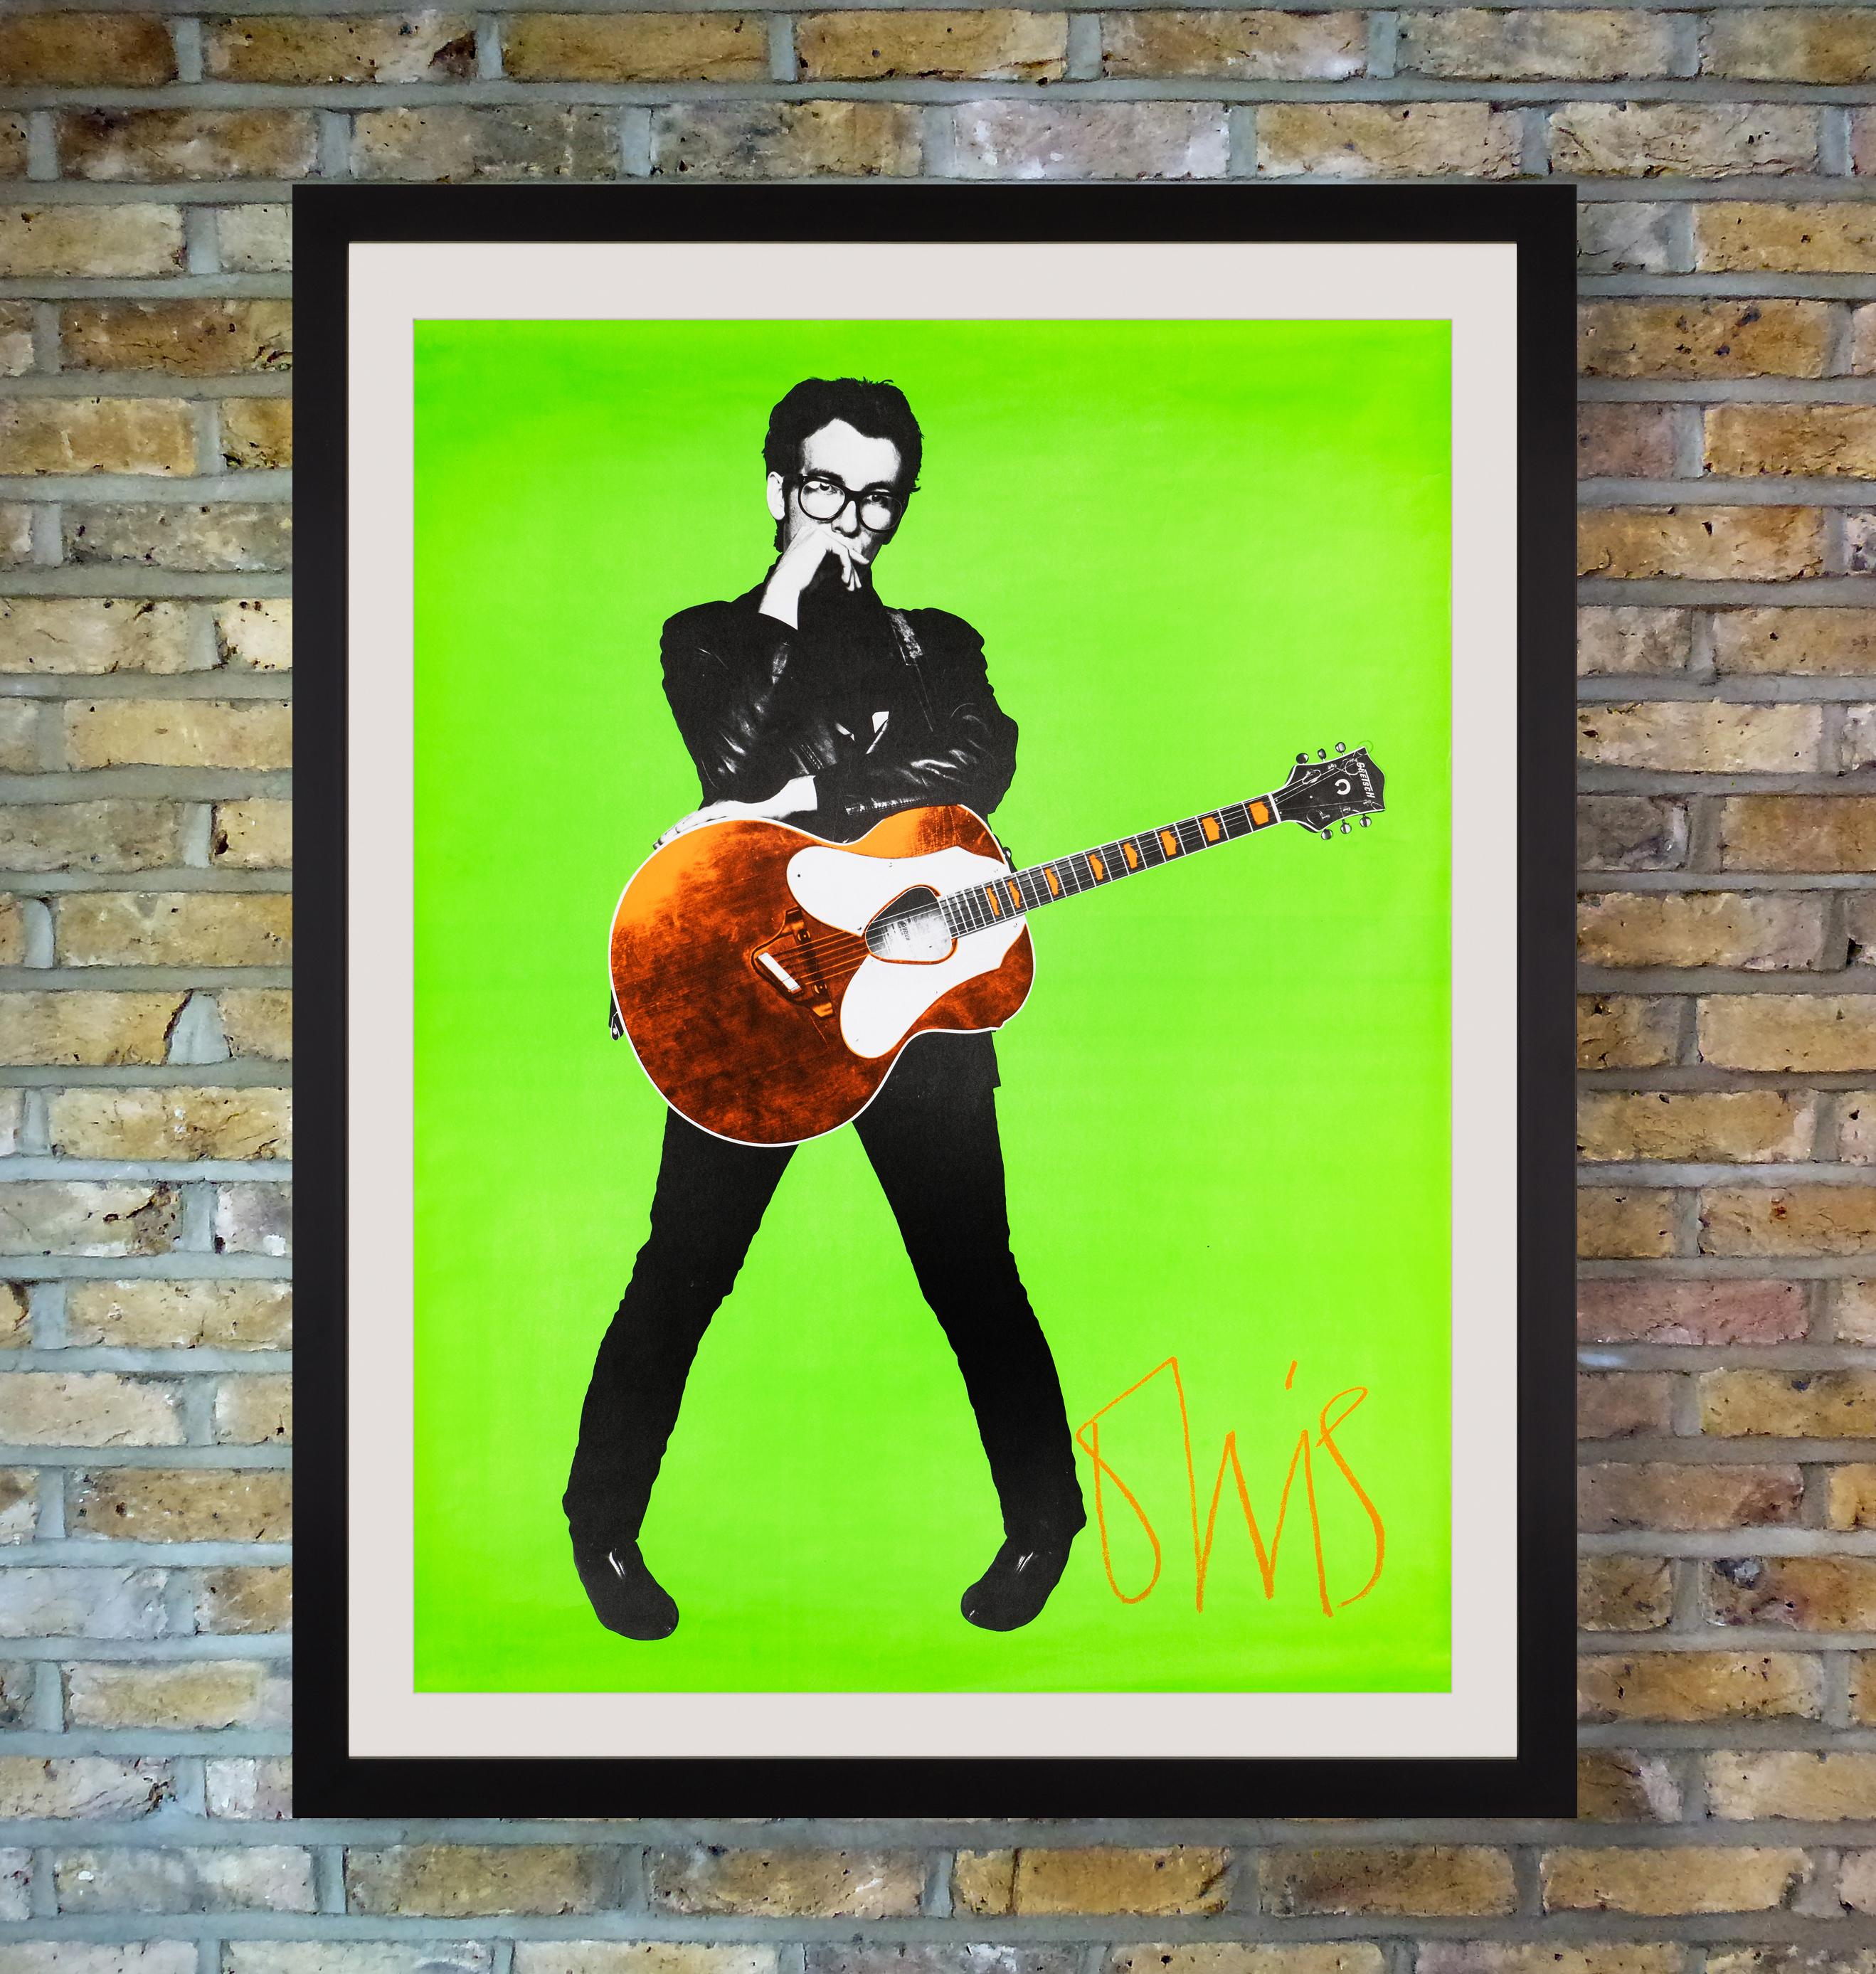 A spectacular day-glo promo poster for 1970's British new wave singer-songwriter Elvis Costello by innovative Stiff Records design director Barney Bubbles, incorporating a photograph by Chalkie Davies. Hailed as the 